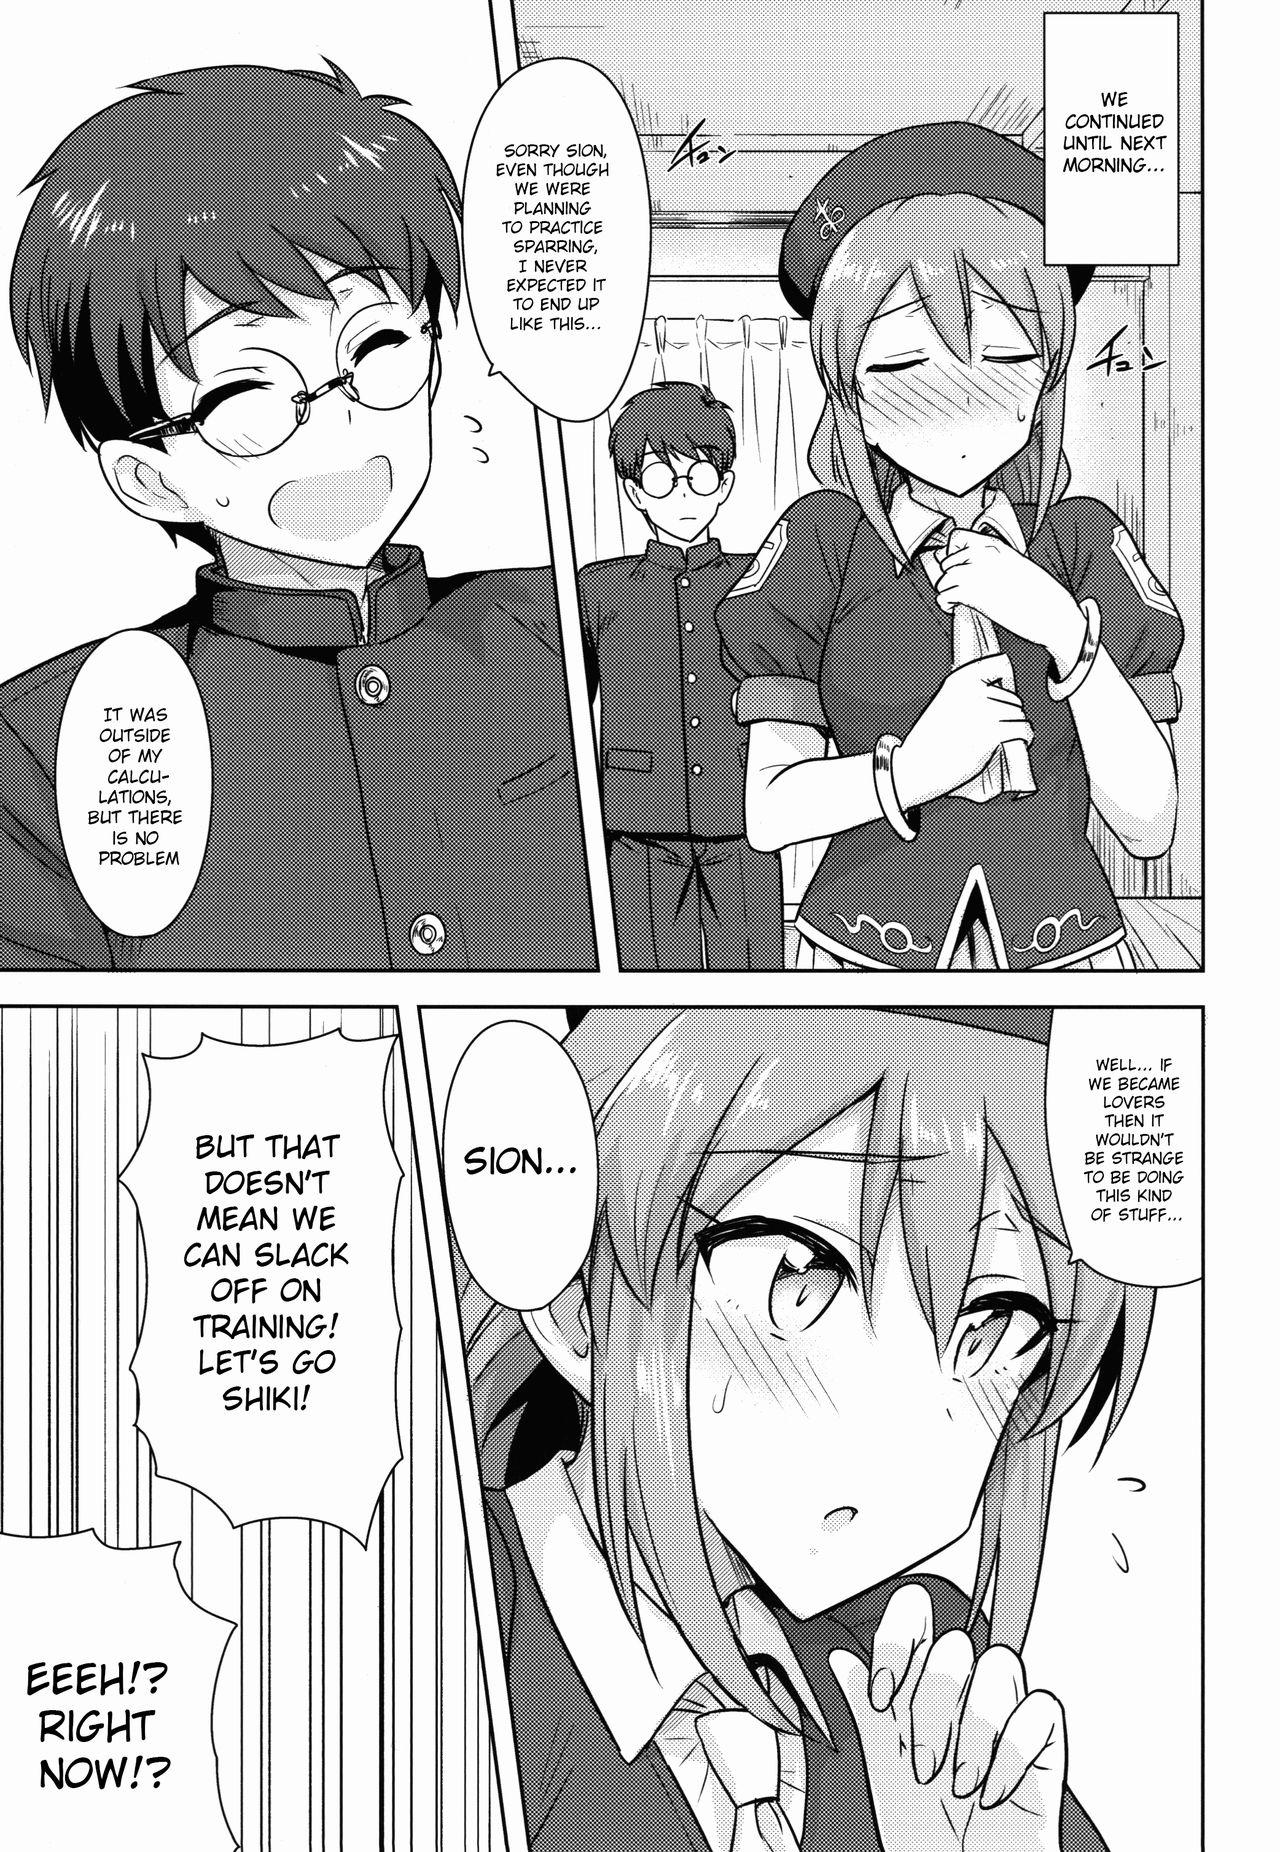 Swinger Aru Hi no Futari MelBlo Hen | A Certain Day with Each Other Melty Blood Hen - Tsukihime Collar - Page 8